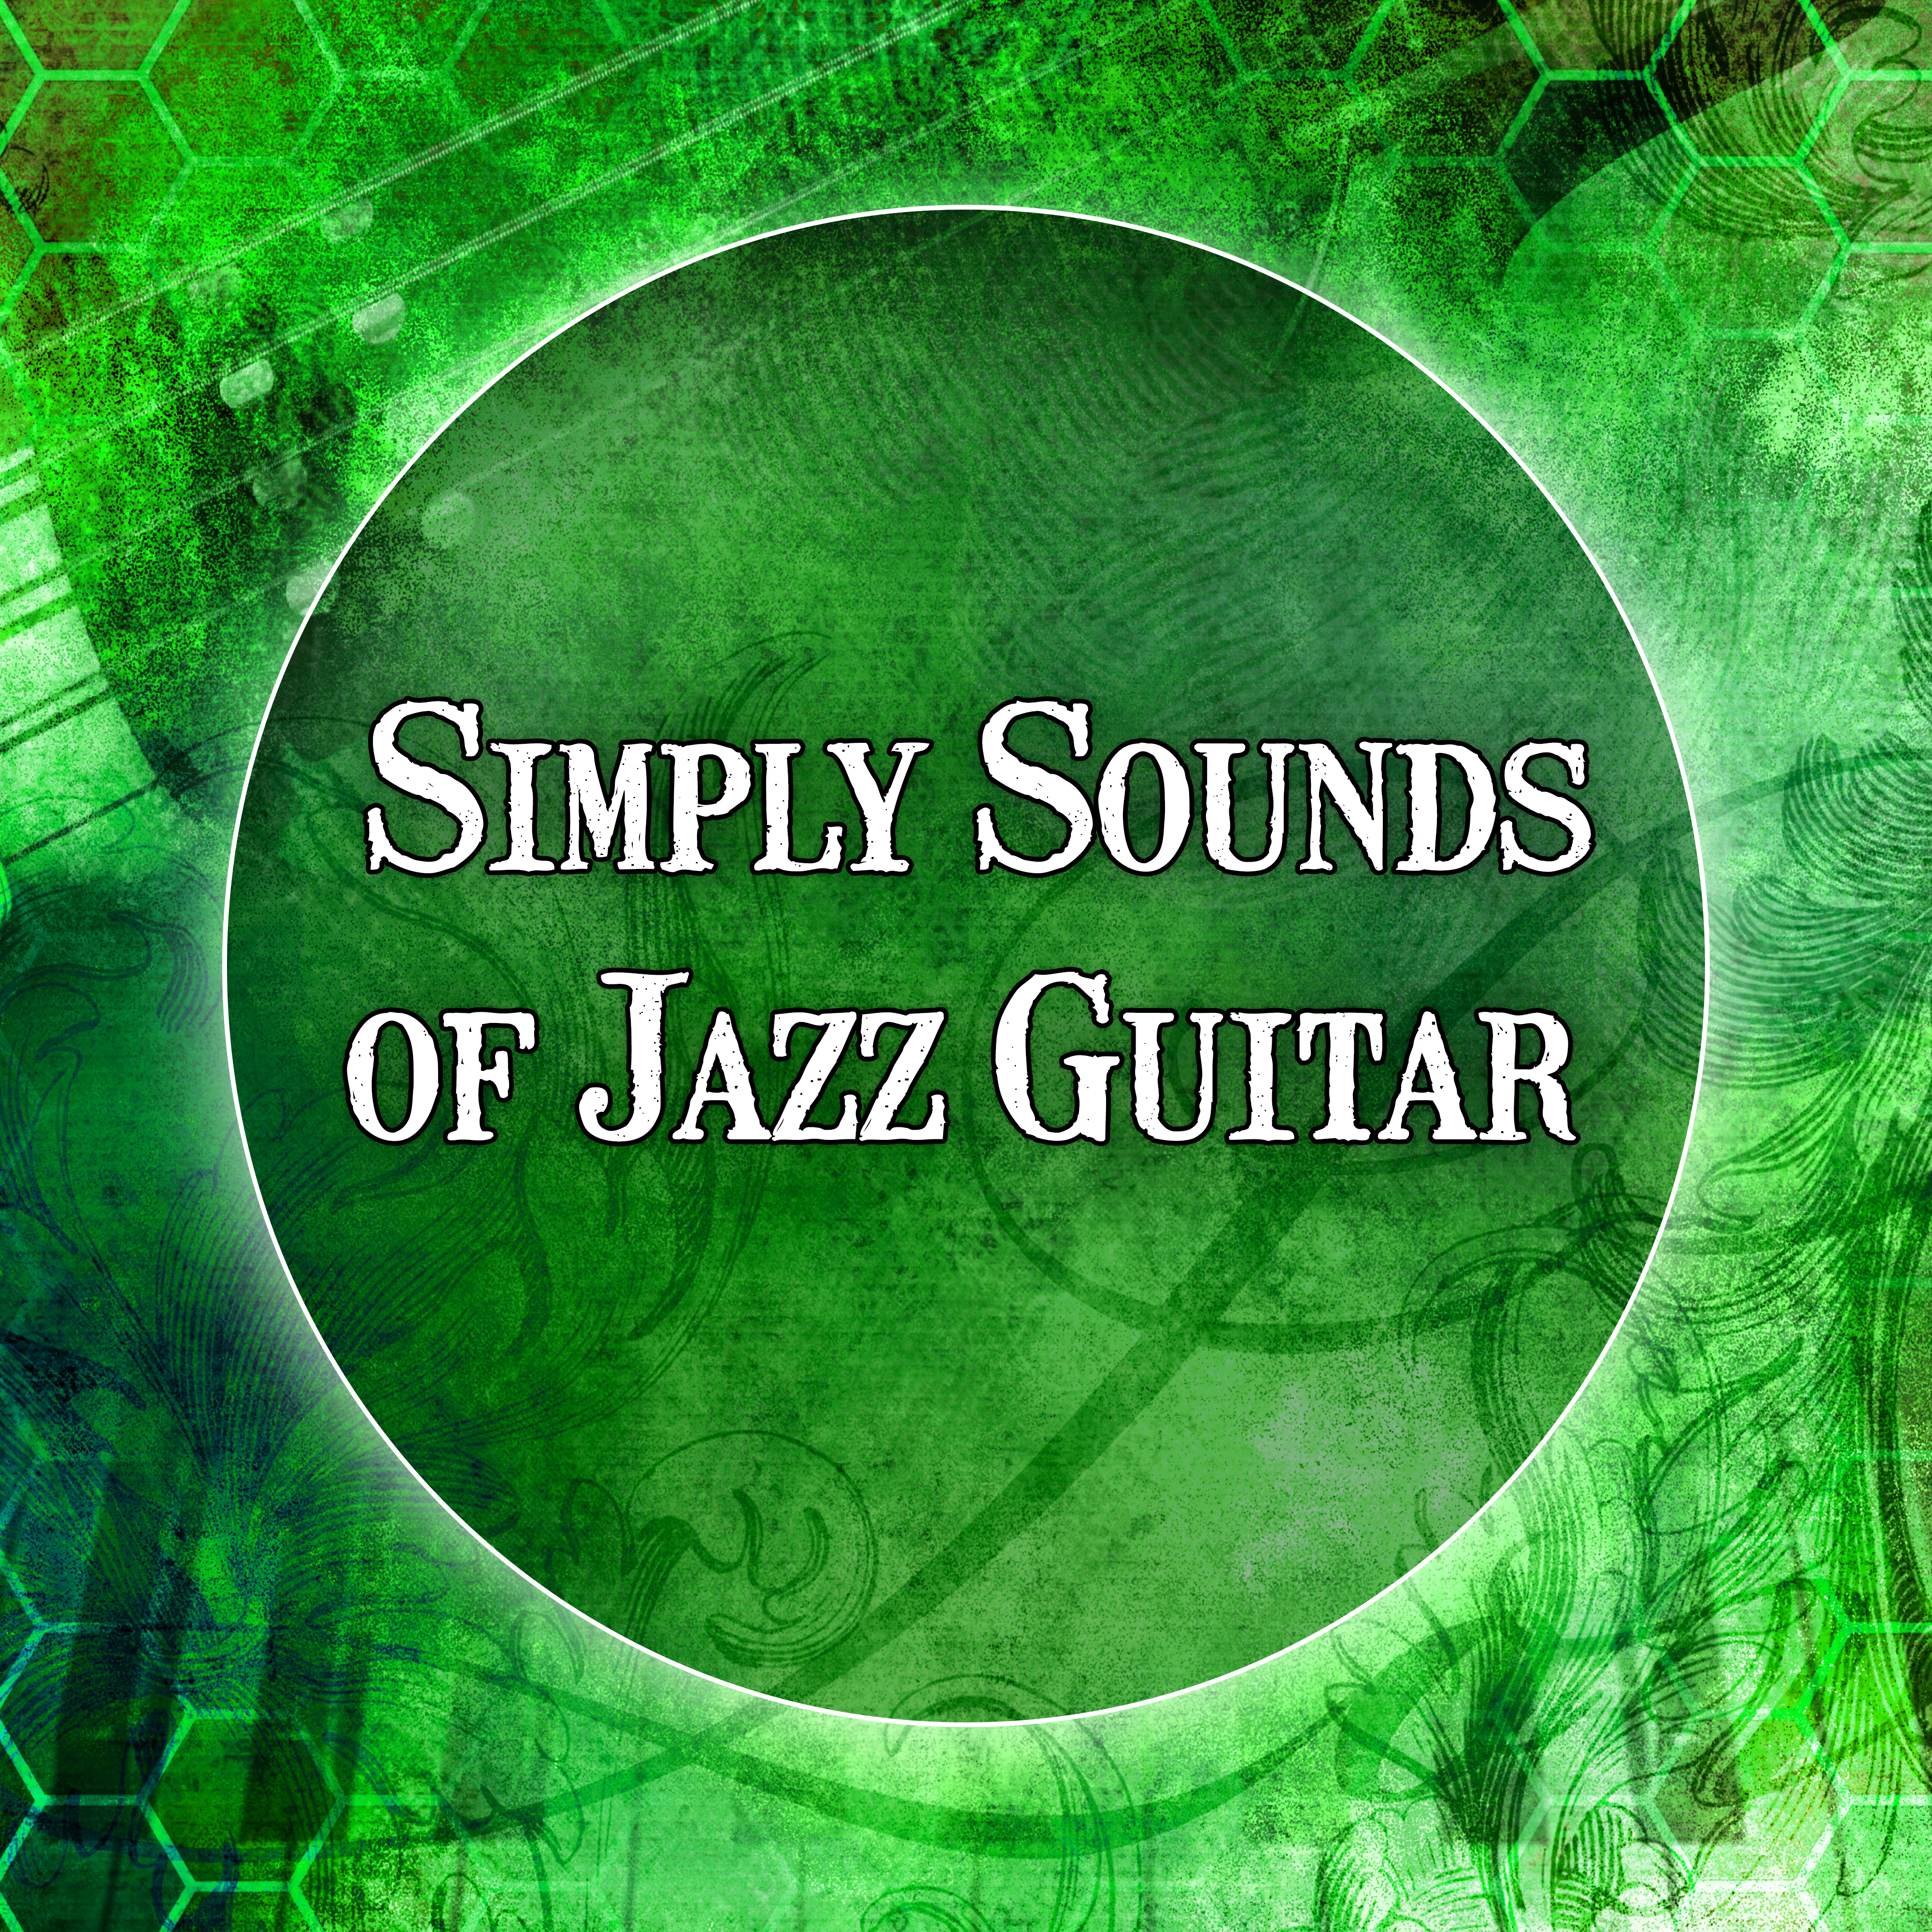 Simply Sounds of Jazz Guitar -  Beautiful Jazz Guitar Instrumental Music, Pure Emotions, Healing Jazz Sounds and Relaxation